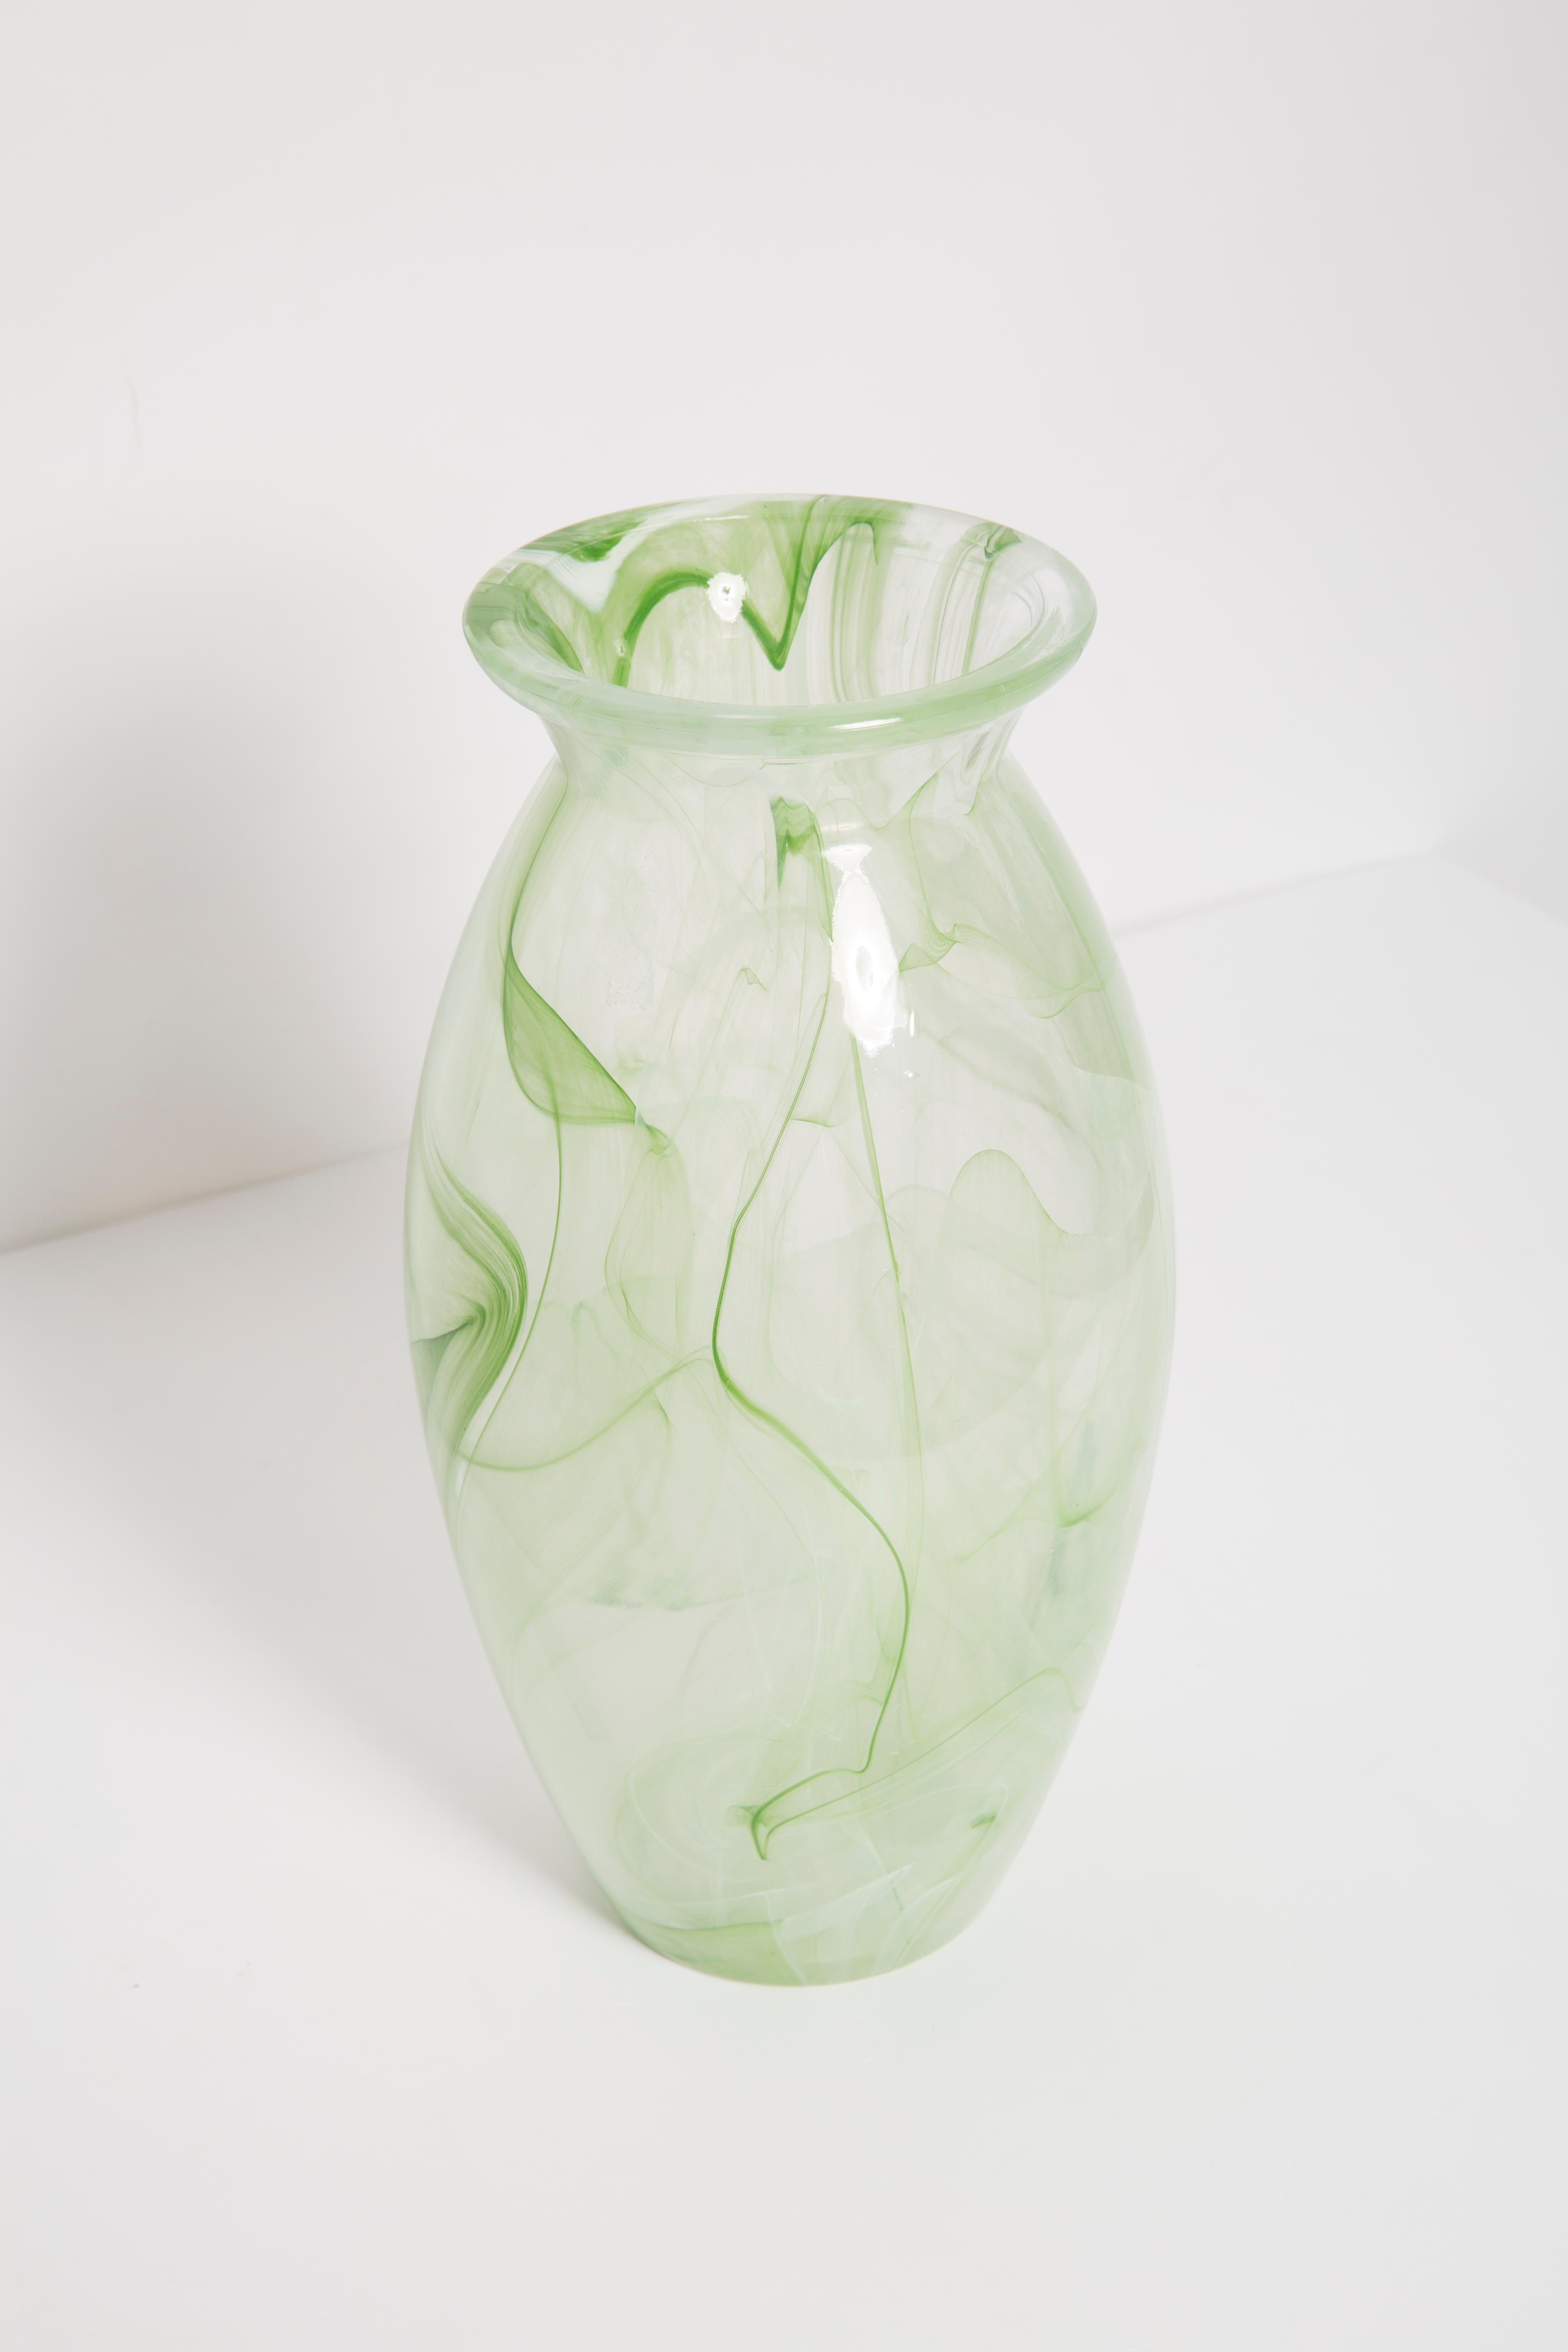 20th Century Mid Century Vintage Green and White Big Vase, Italy, 1960s For Sale